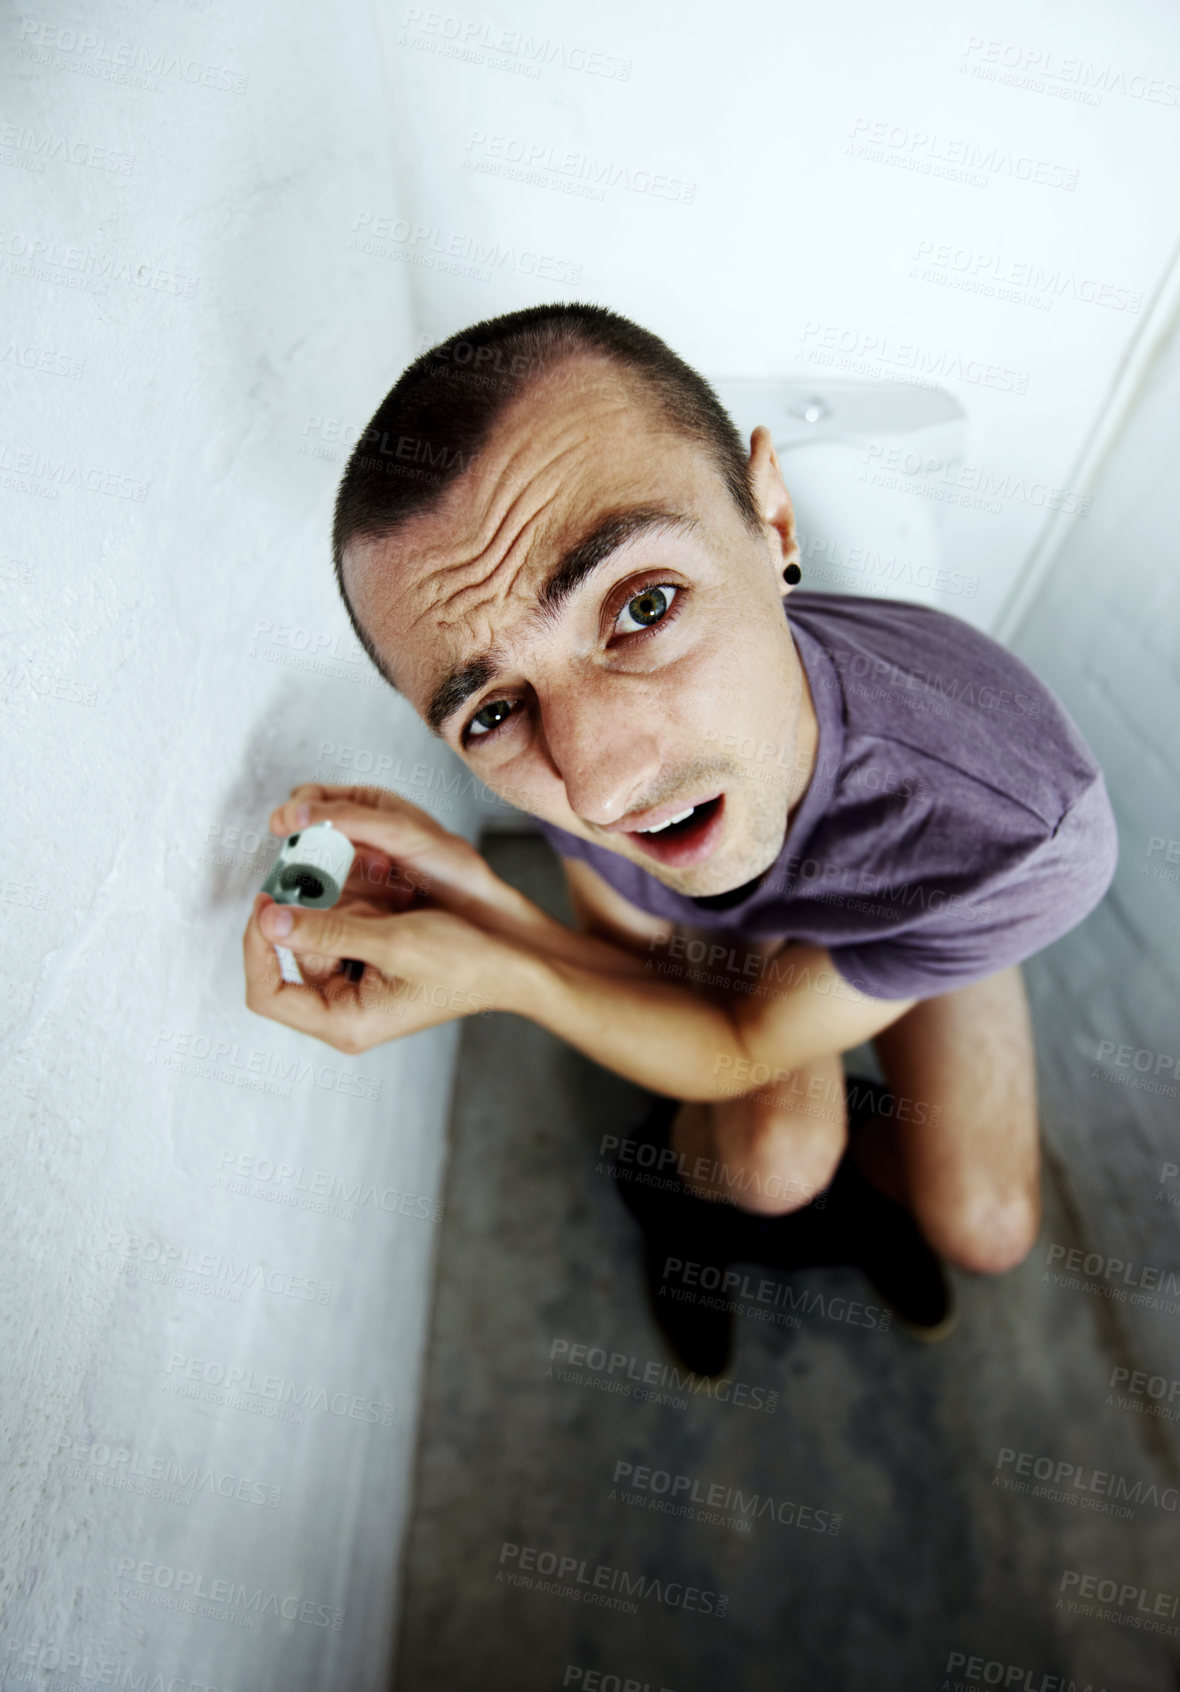 Buy stock photo A young man stuck in a toilet trying to reach a tiny roll of toilet paper